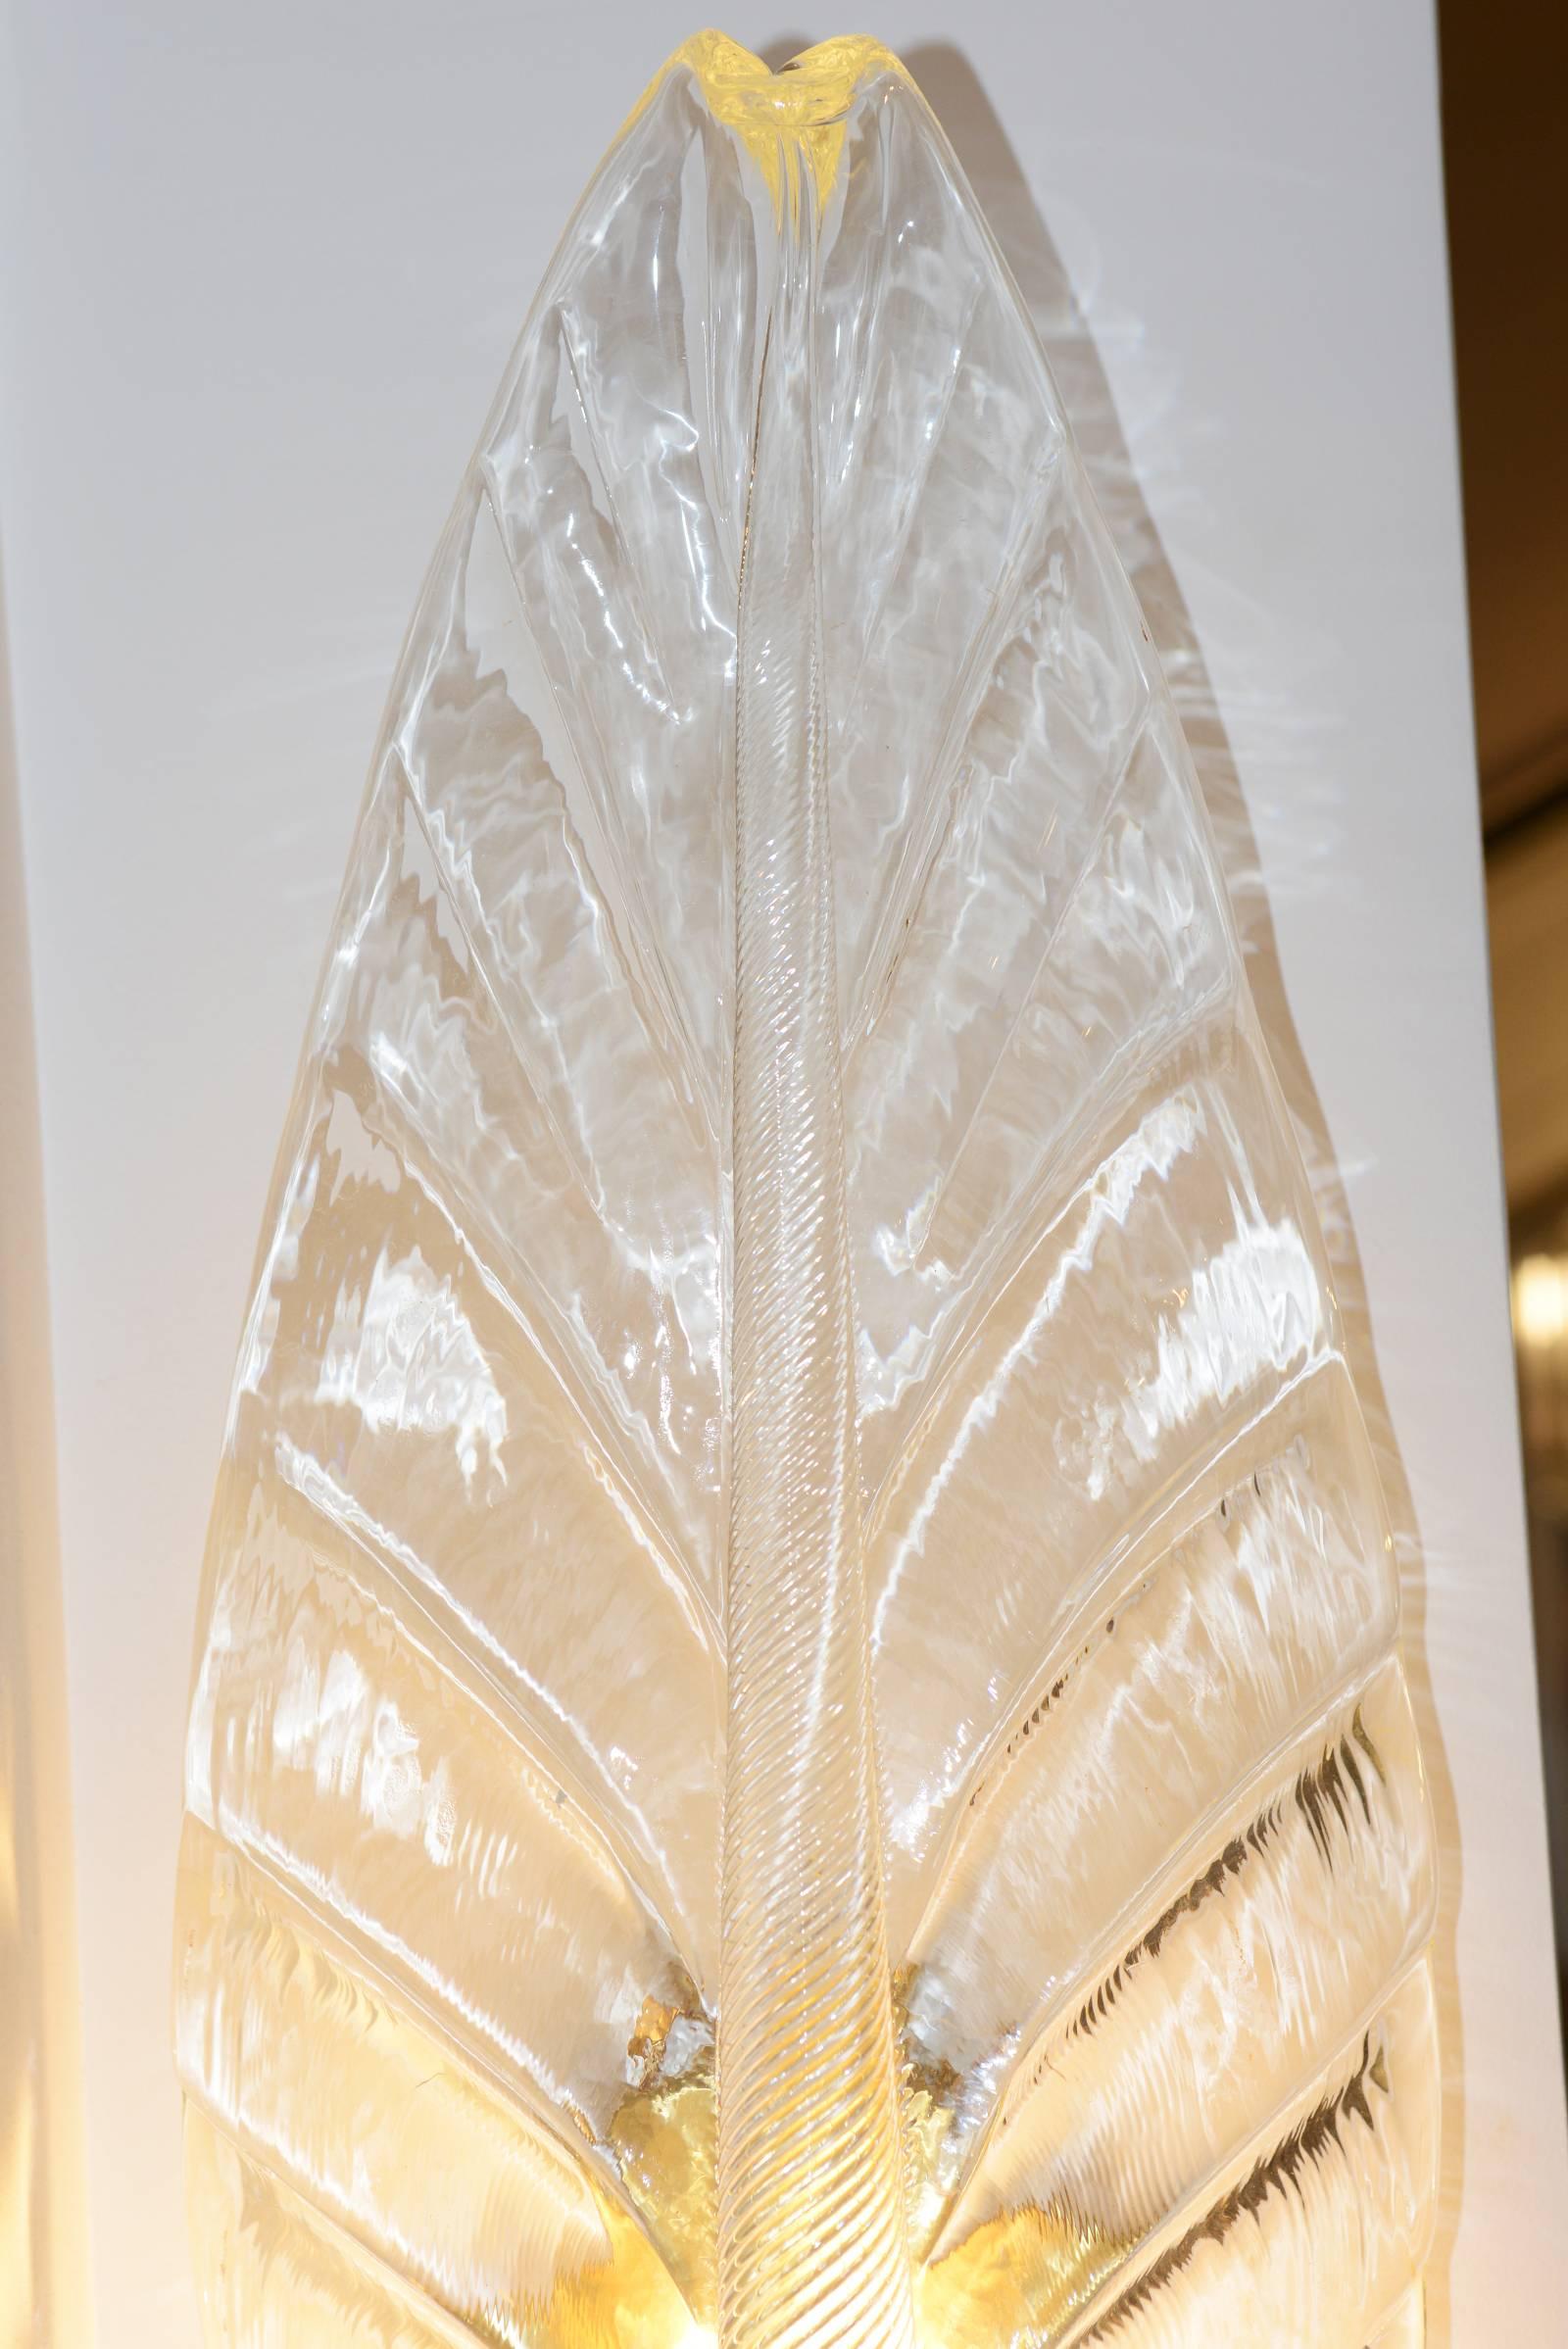 Wall light leaves set of two in pure handcrafted.
Murano crystal glass. Art Deco style. Exceptional piece.
L 24 x D 17.5 x H 67.5cm/piece.
Unit price: 2900,00€
Set of two price: 5800,00€
